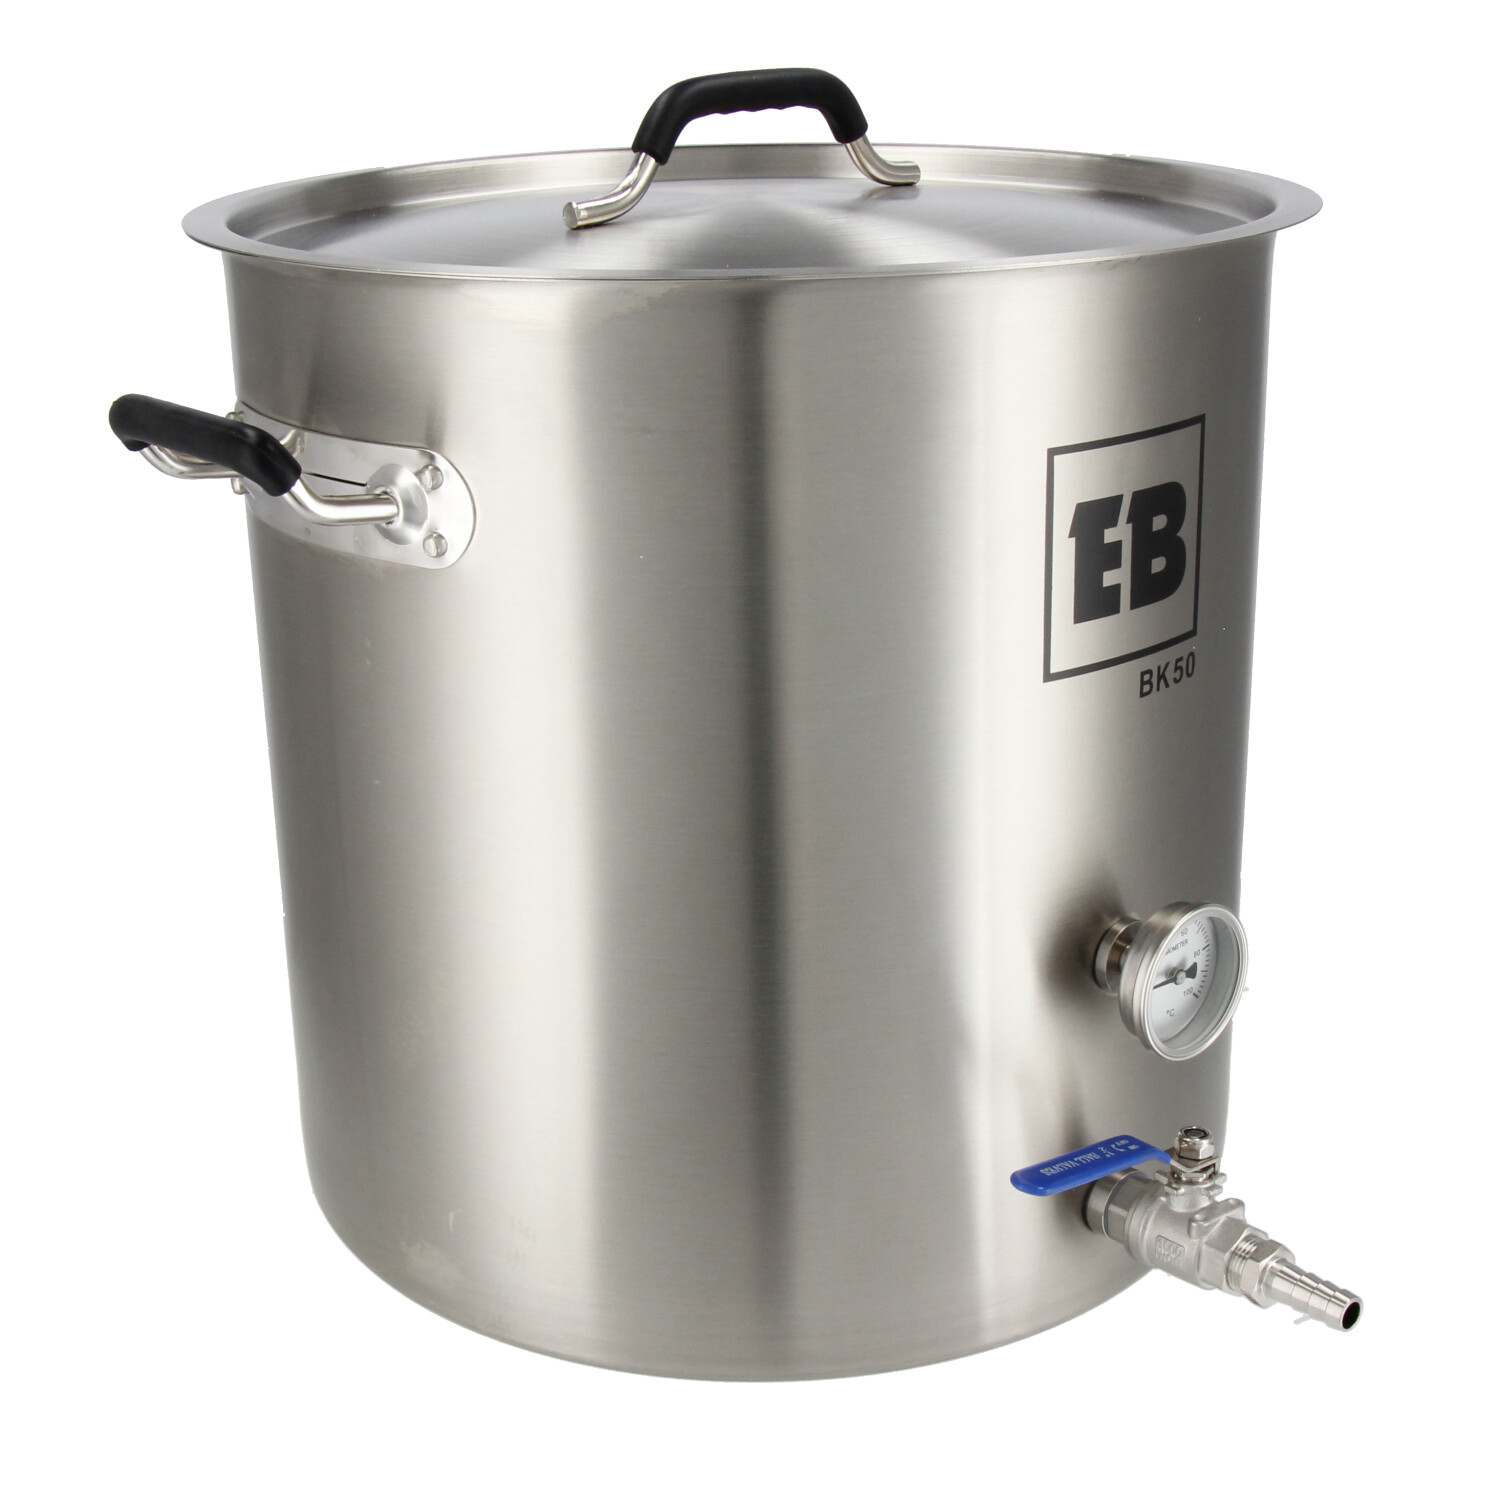 Easybrew Brewkettle 50 liter with tap and thermometer